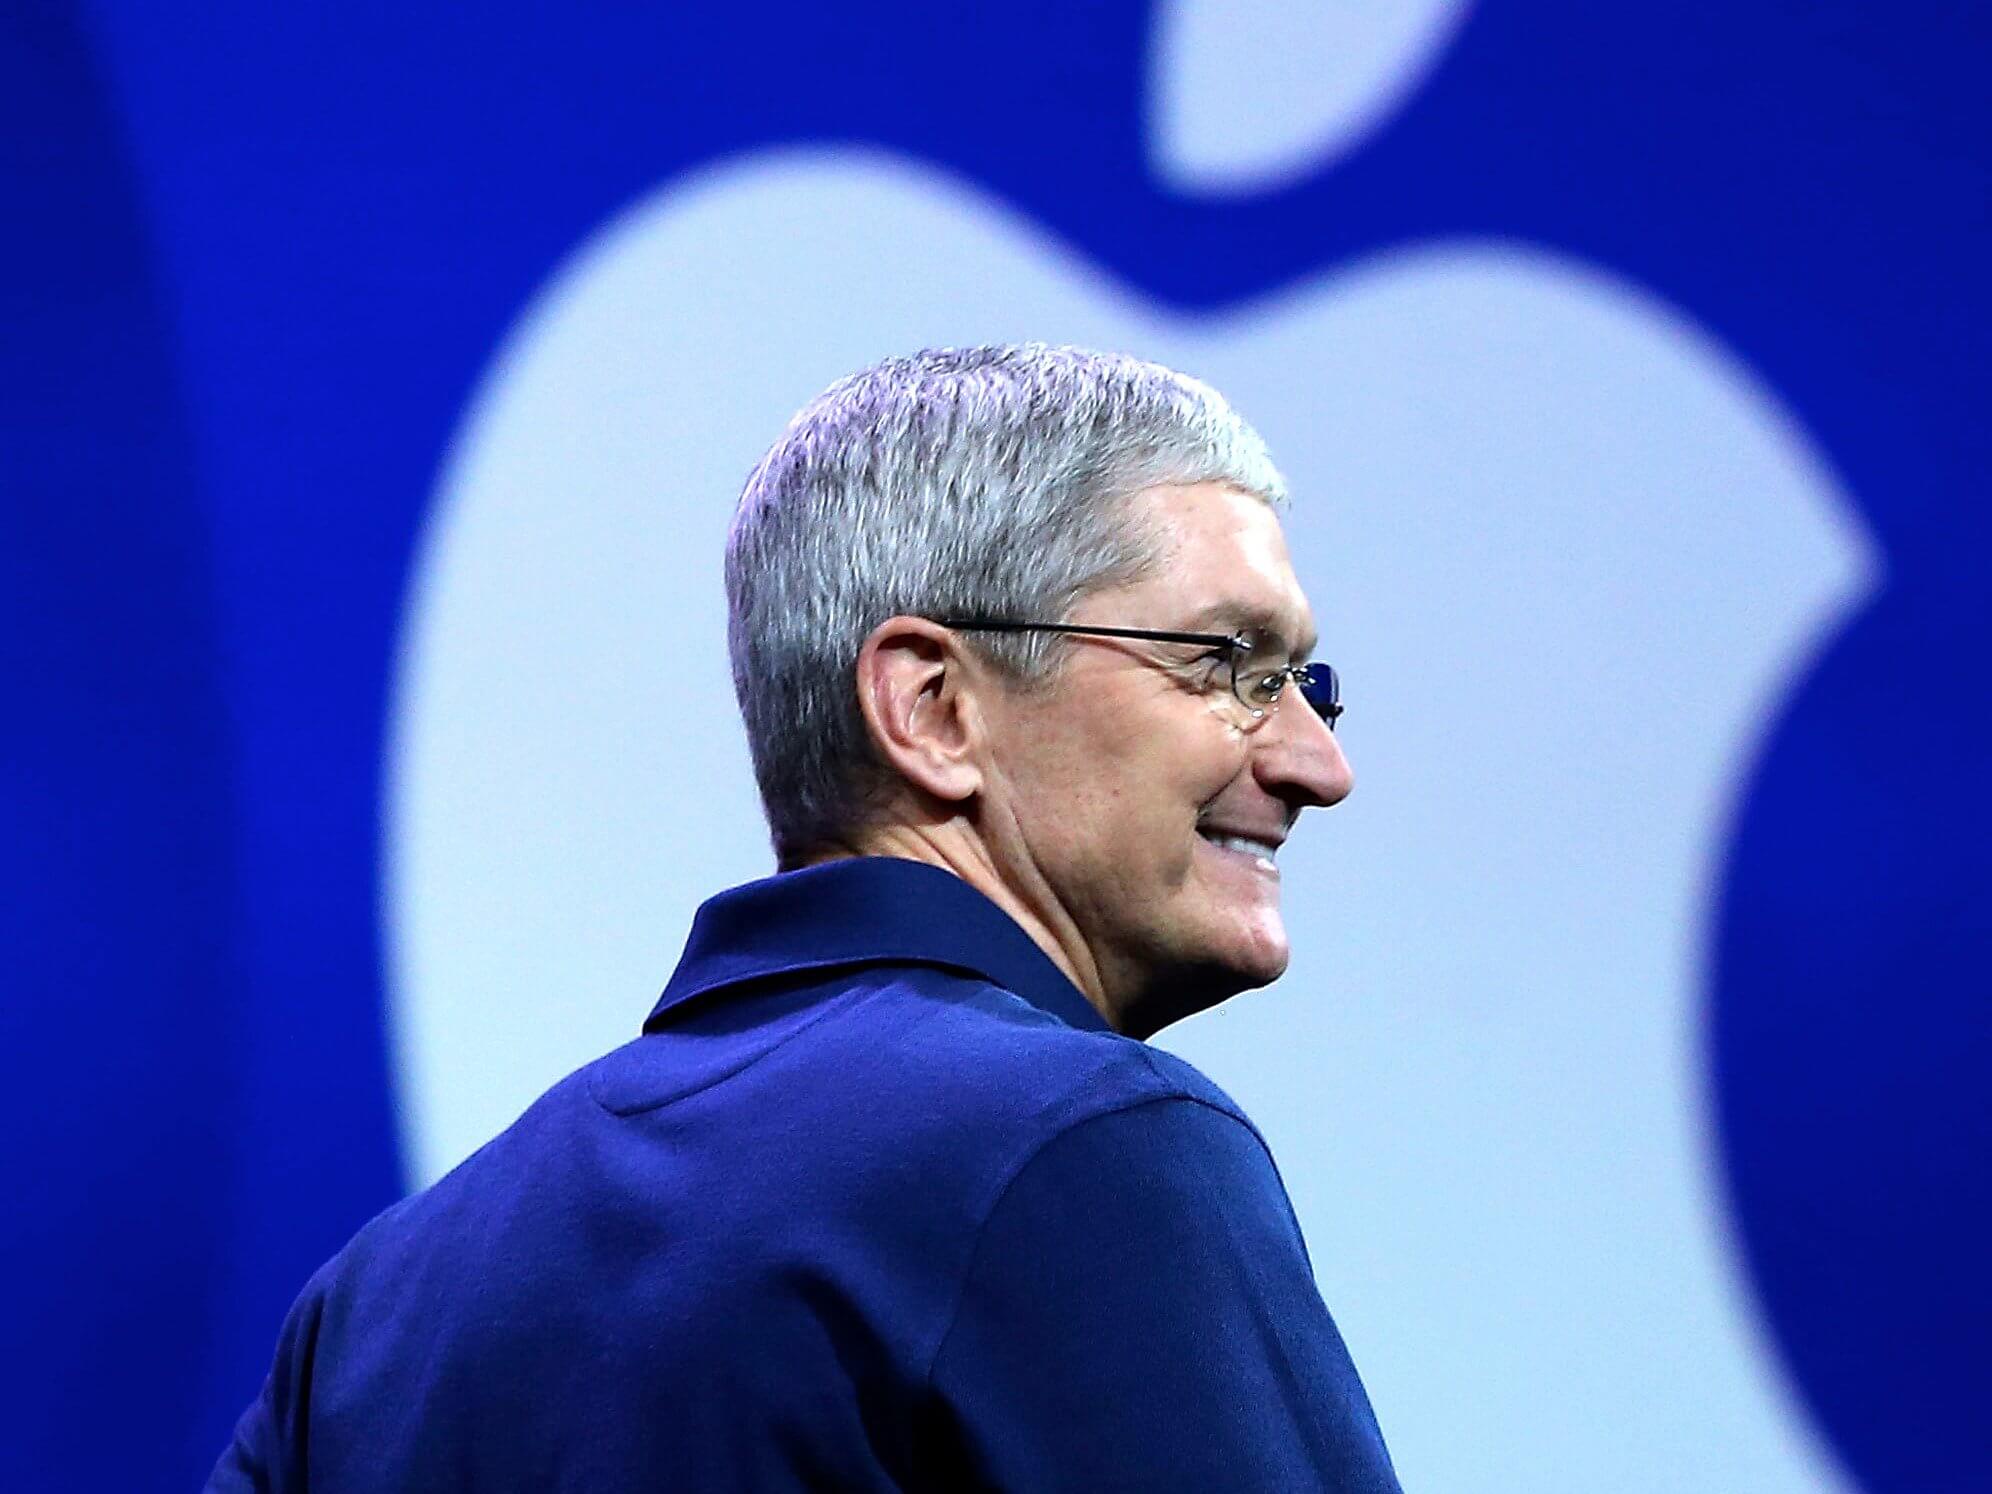 Tim Cook confirms succession plan, commits to remain Apple CEO for foreseeable future